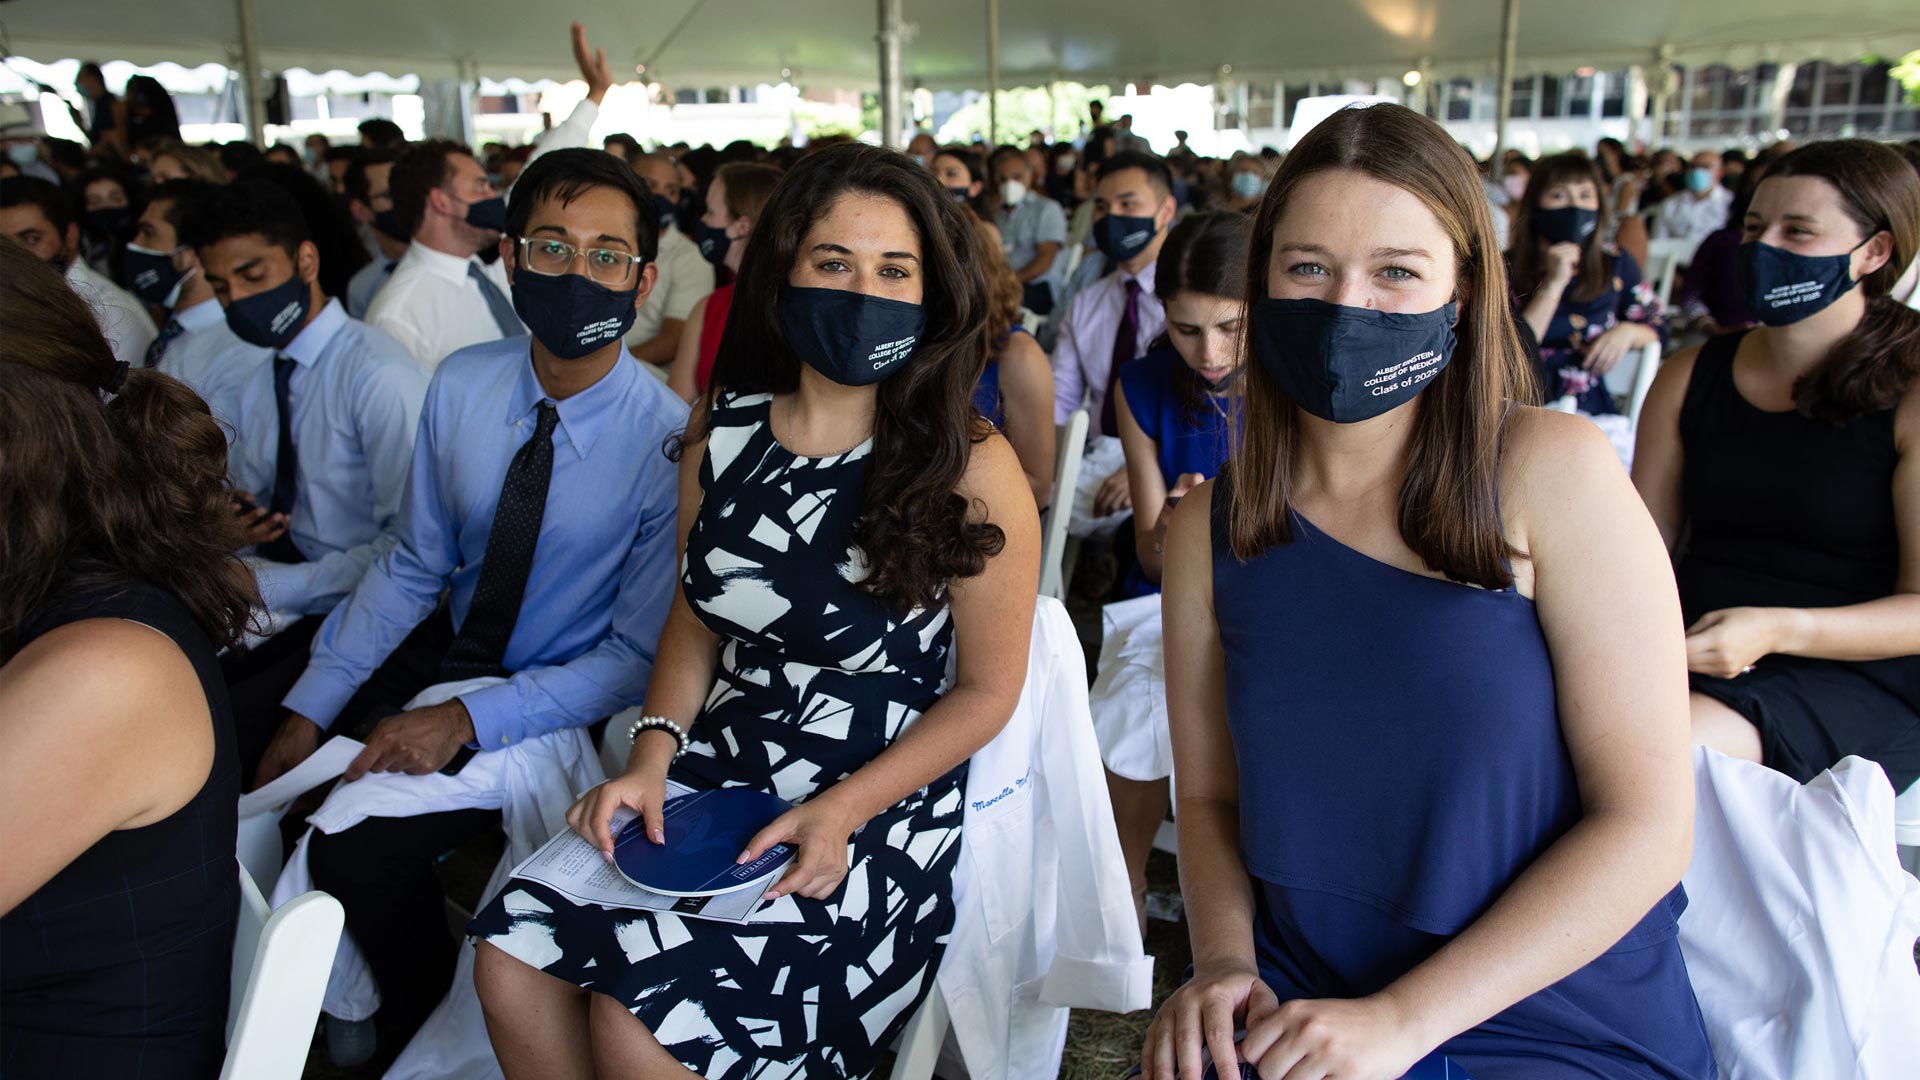 Propelled by a Pandemic, Incoming Einstein Students Begin Medical Education Journey